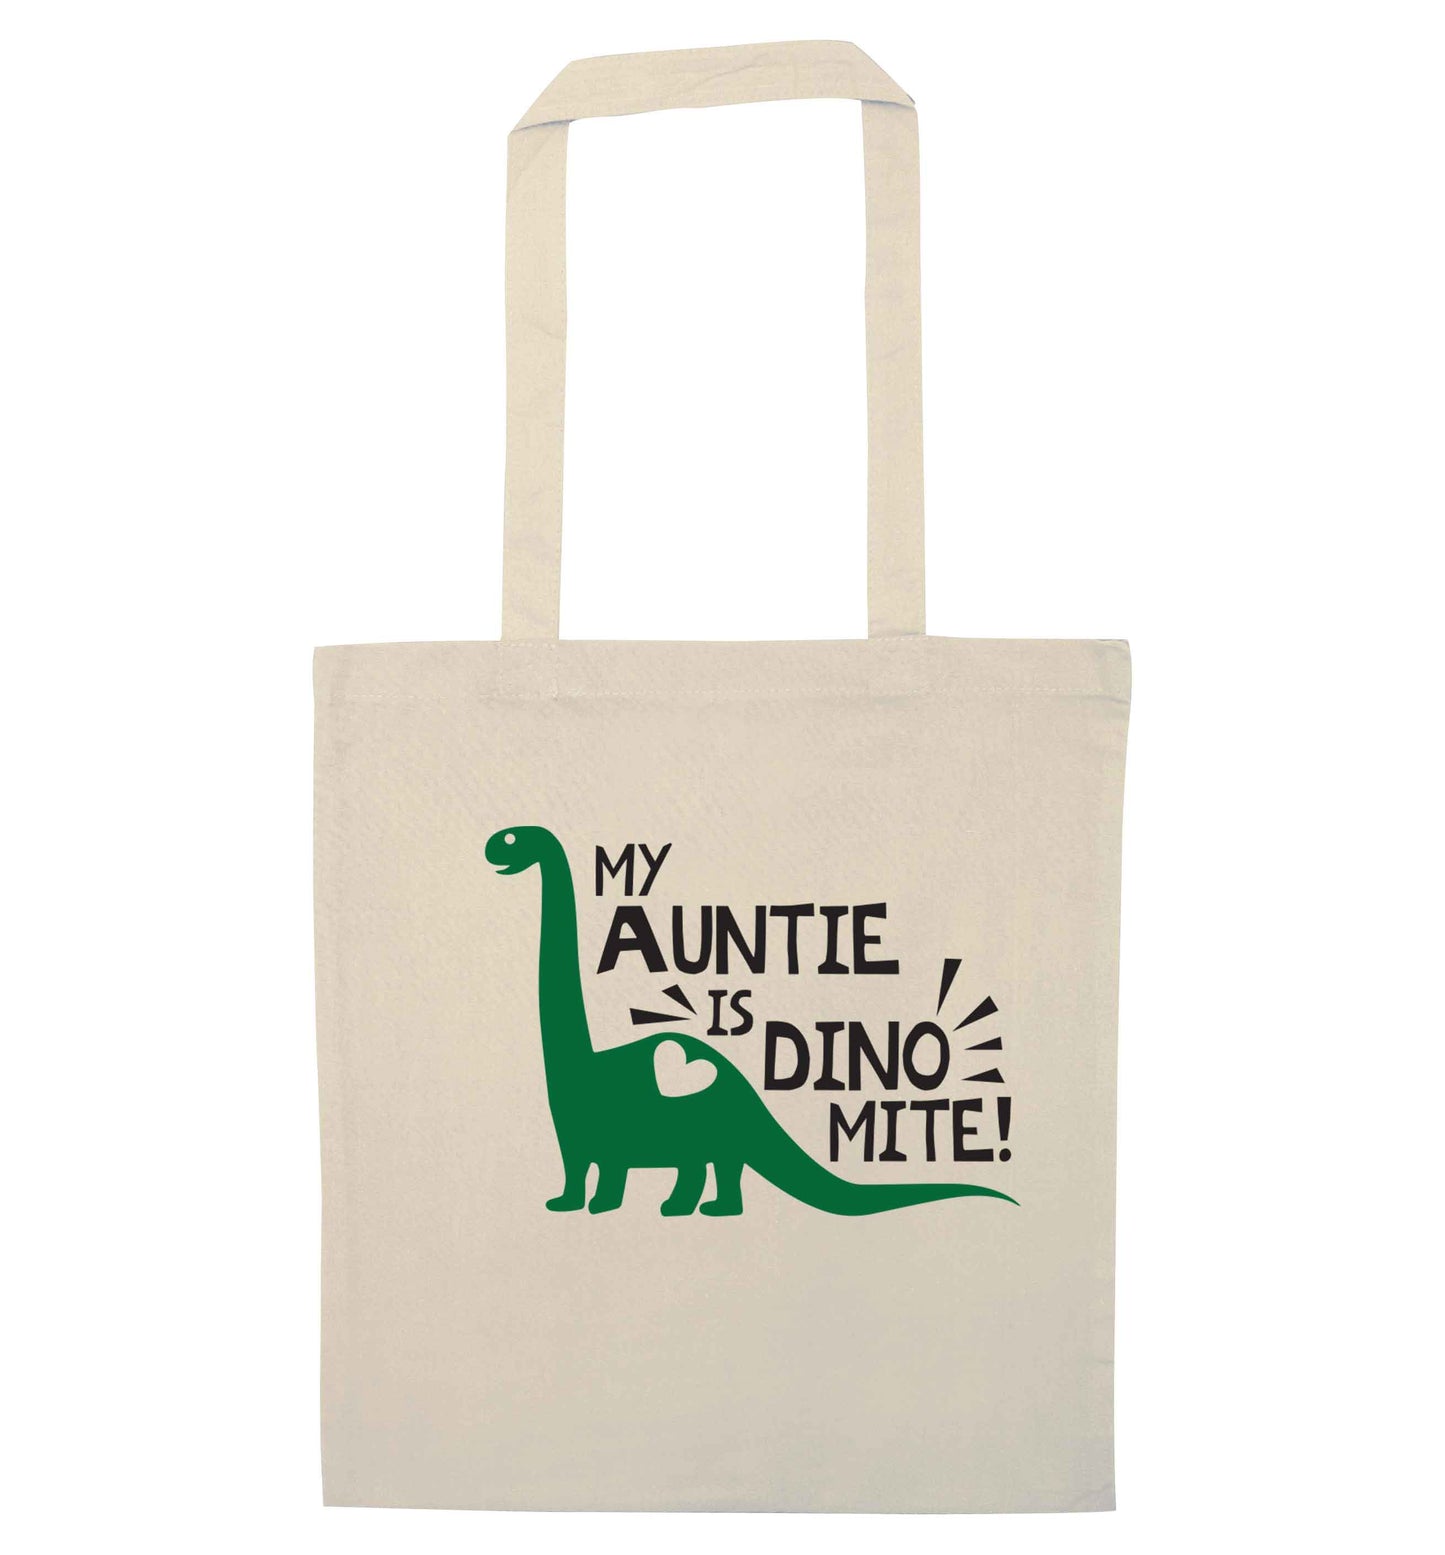 My auntie is dinomite! natural tote bag